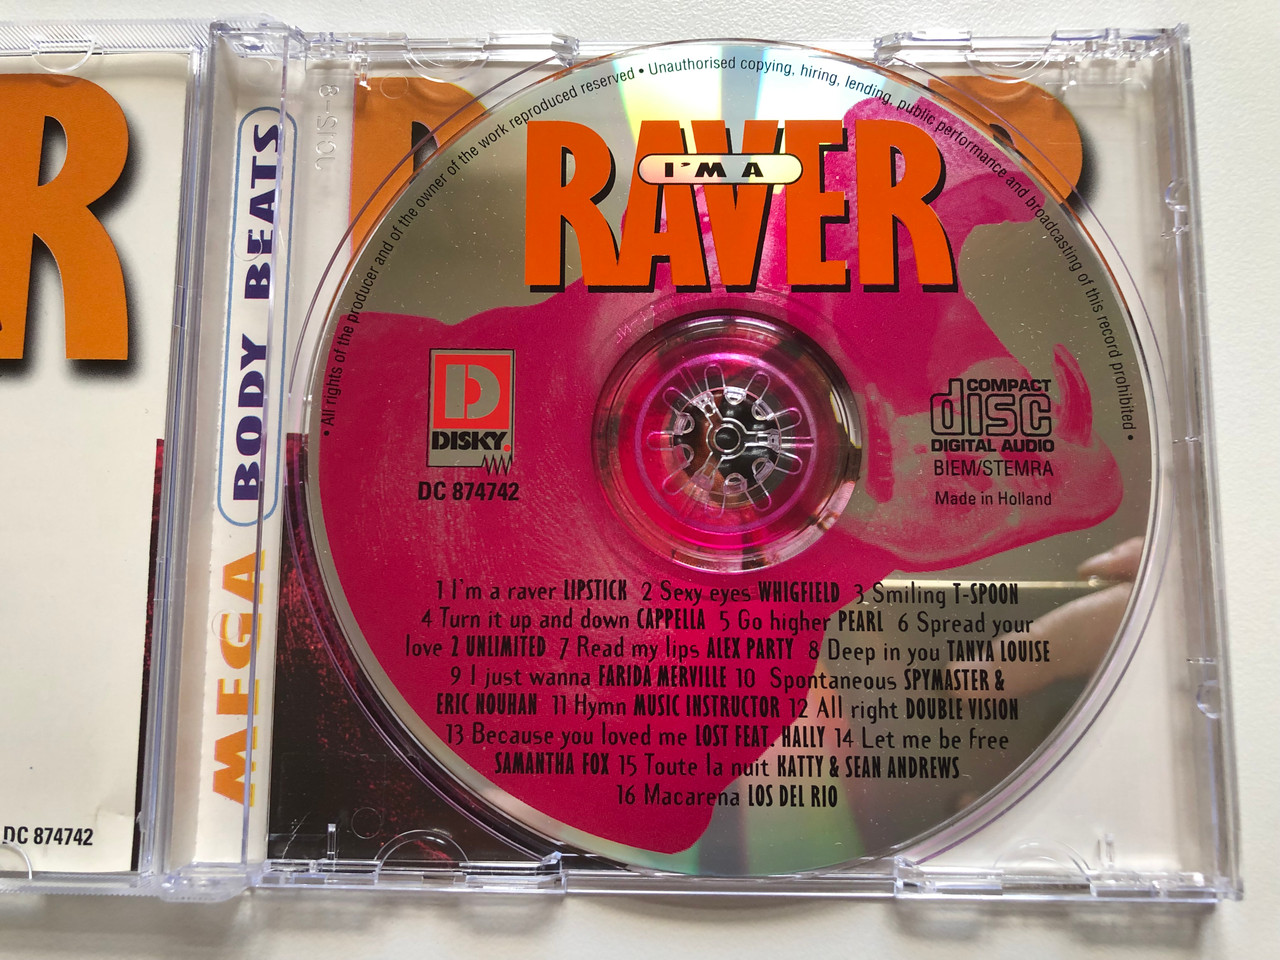 I'm A Raver / 2 Unlimited - Spread Your Love, Hymn - Music Instructor